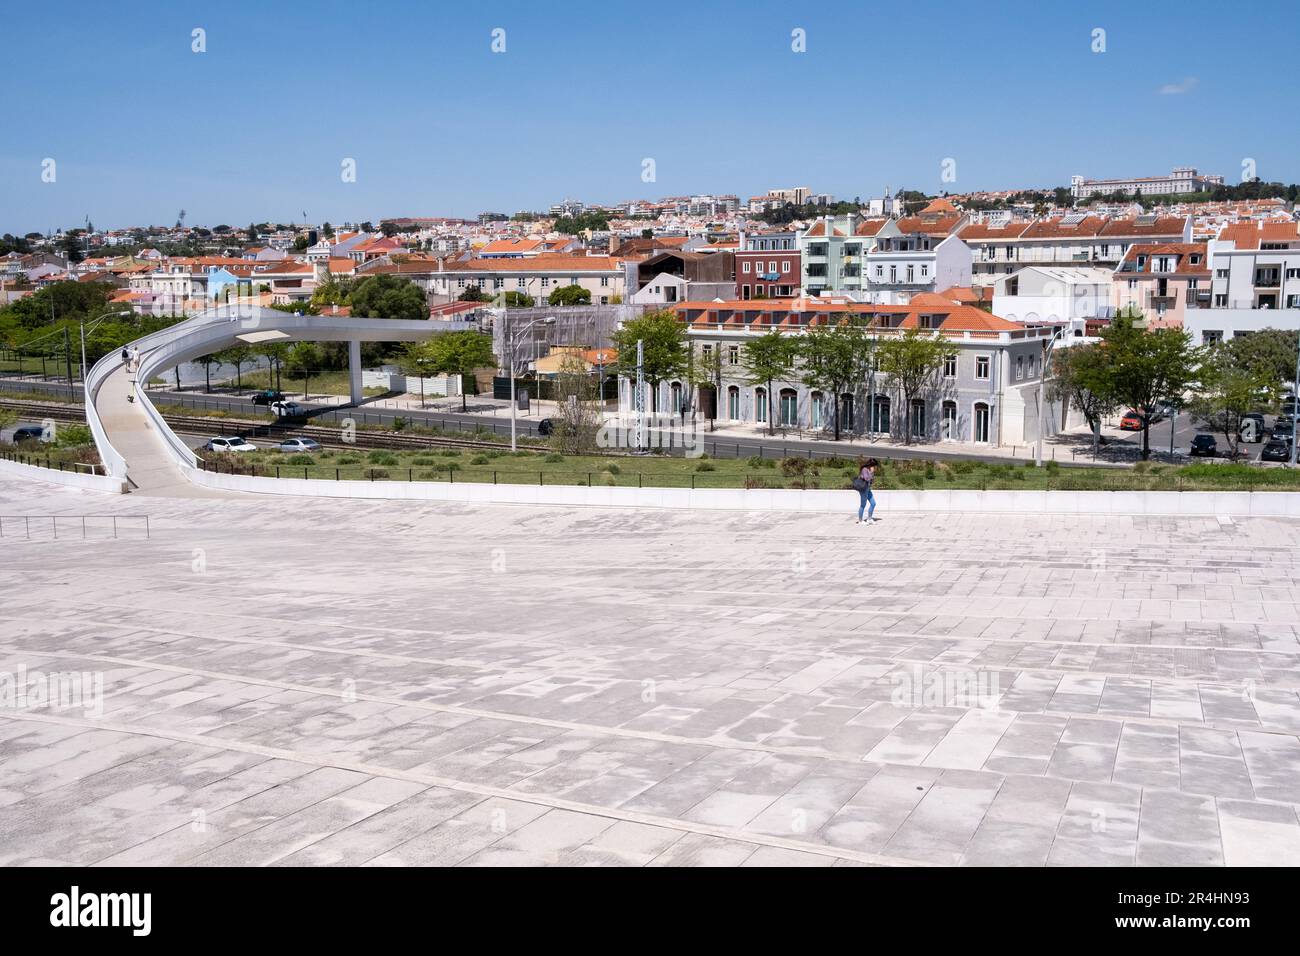 Portugal, Lisbon, 2022-04-29. Tourism and daily life in the streets of Lisbon, the Portuguese capital, in Spring. Photograph by Martin Bertrand. Portu Stock Photo